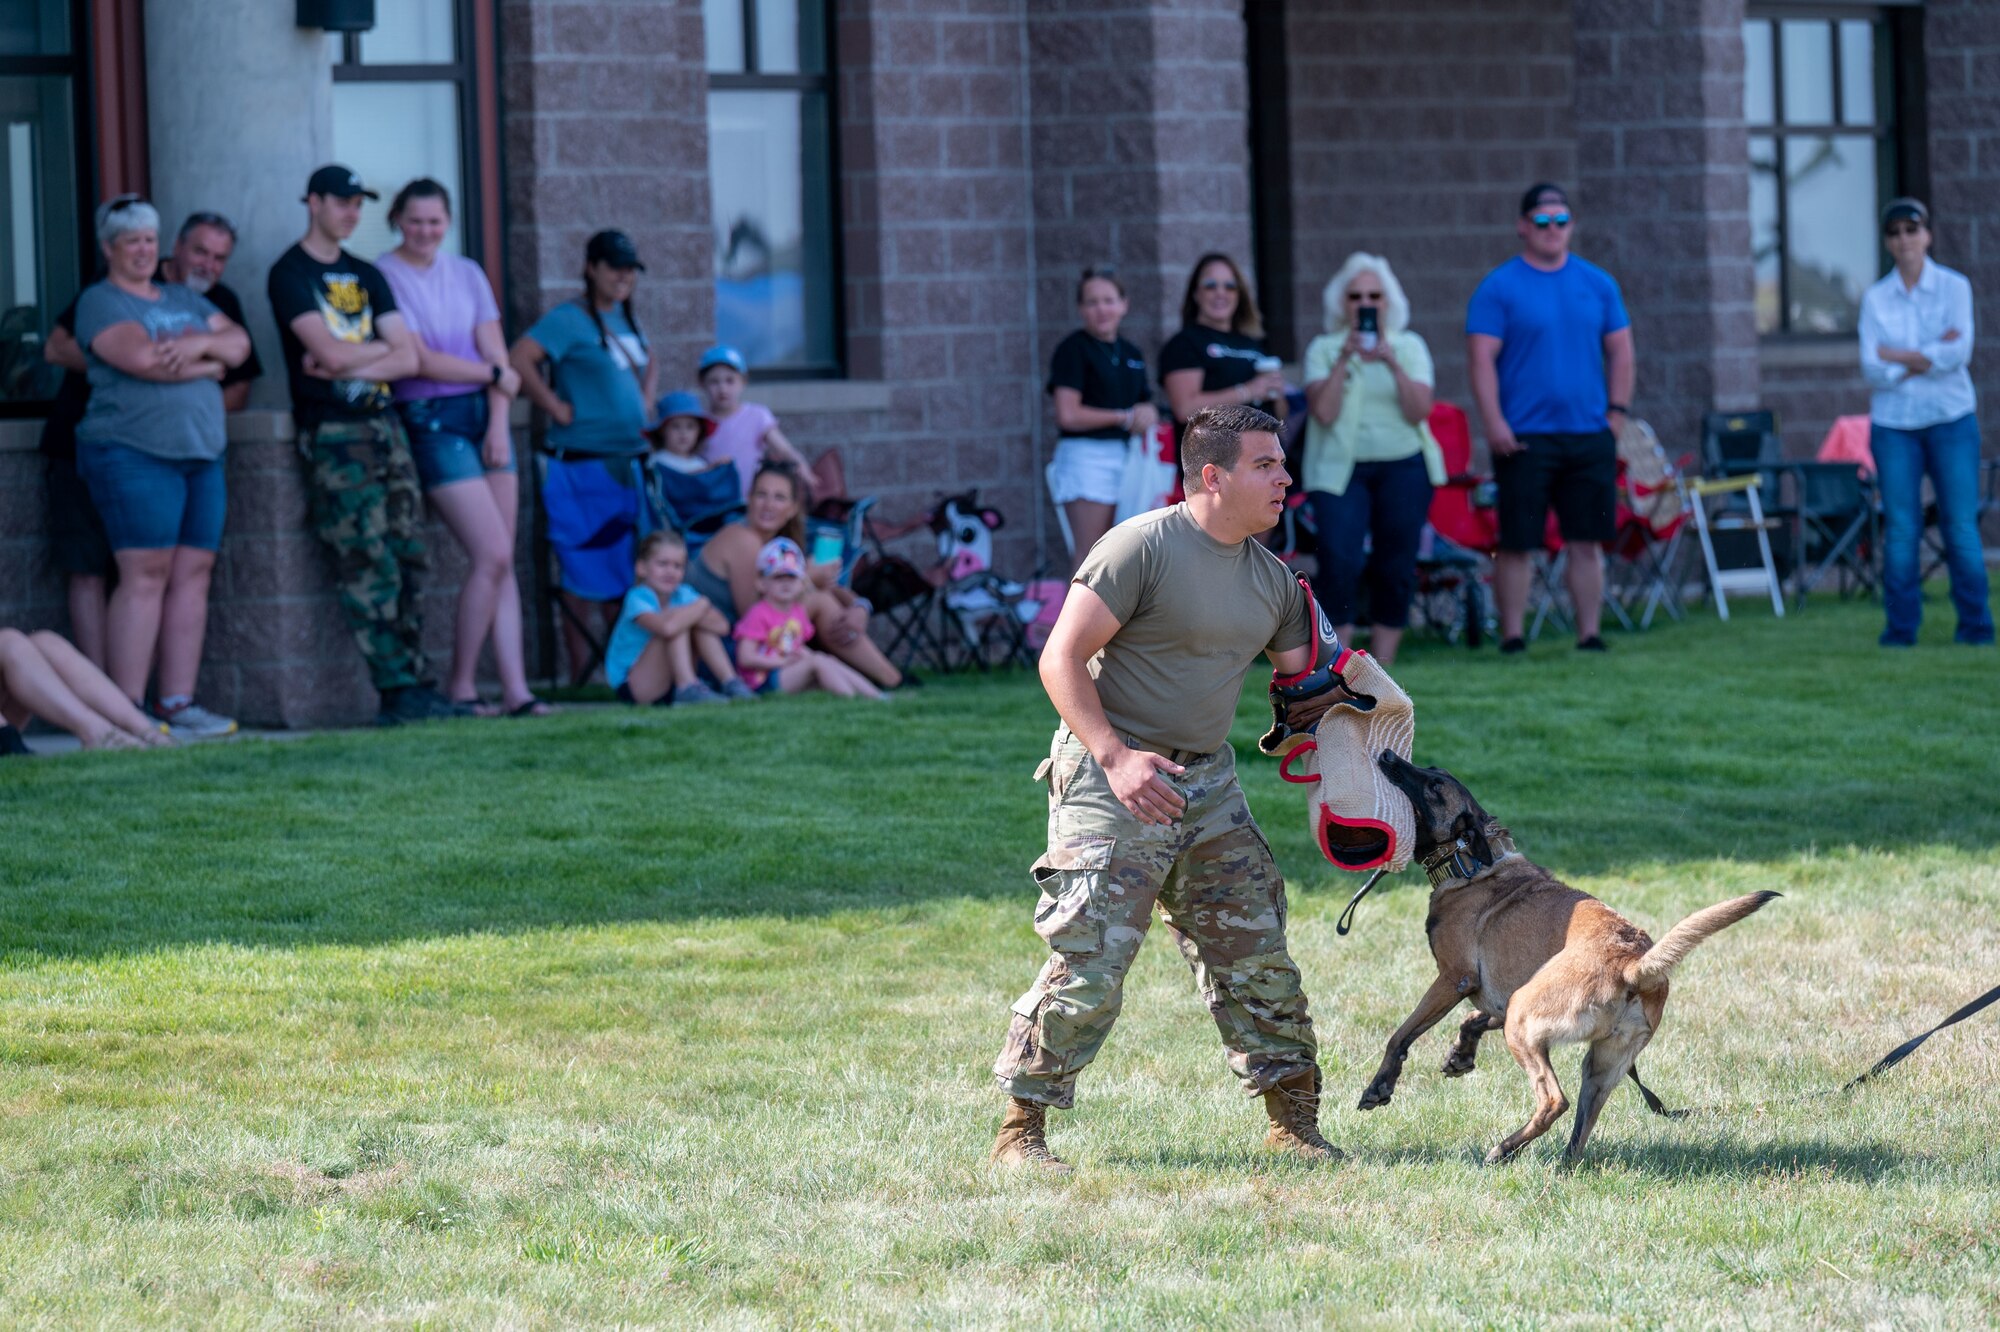 Military Working Dog handler teams from the 341st Missile Wing perform a K-9 demonstration during the Montana’s Military Open House “Flight Over the Falls” at Montana Air National Guard Base, Great Falls, Montana, July 24, 2022.